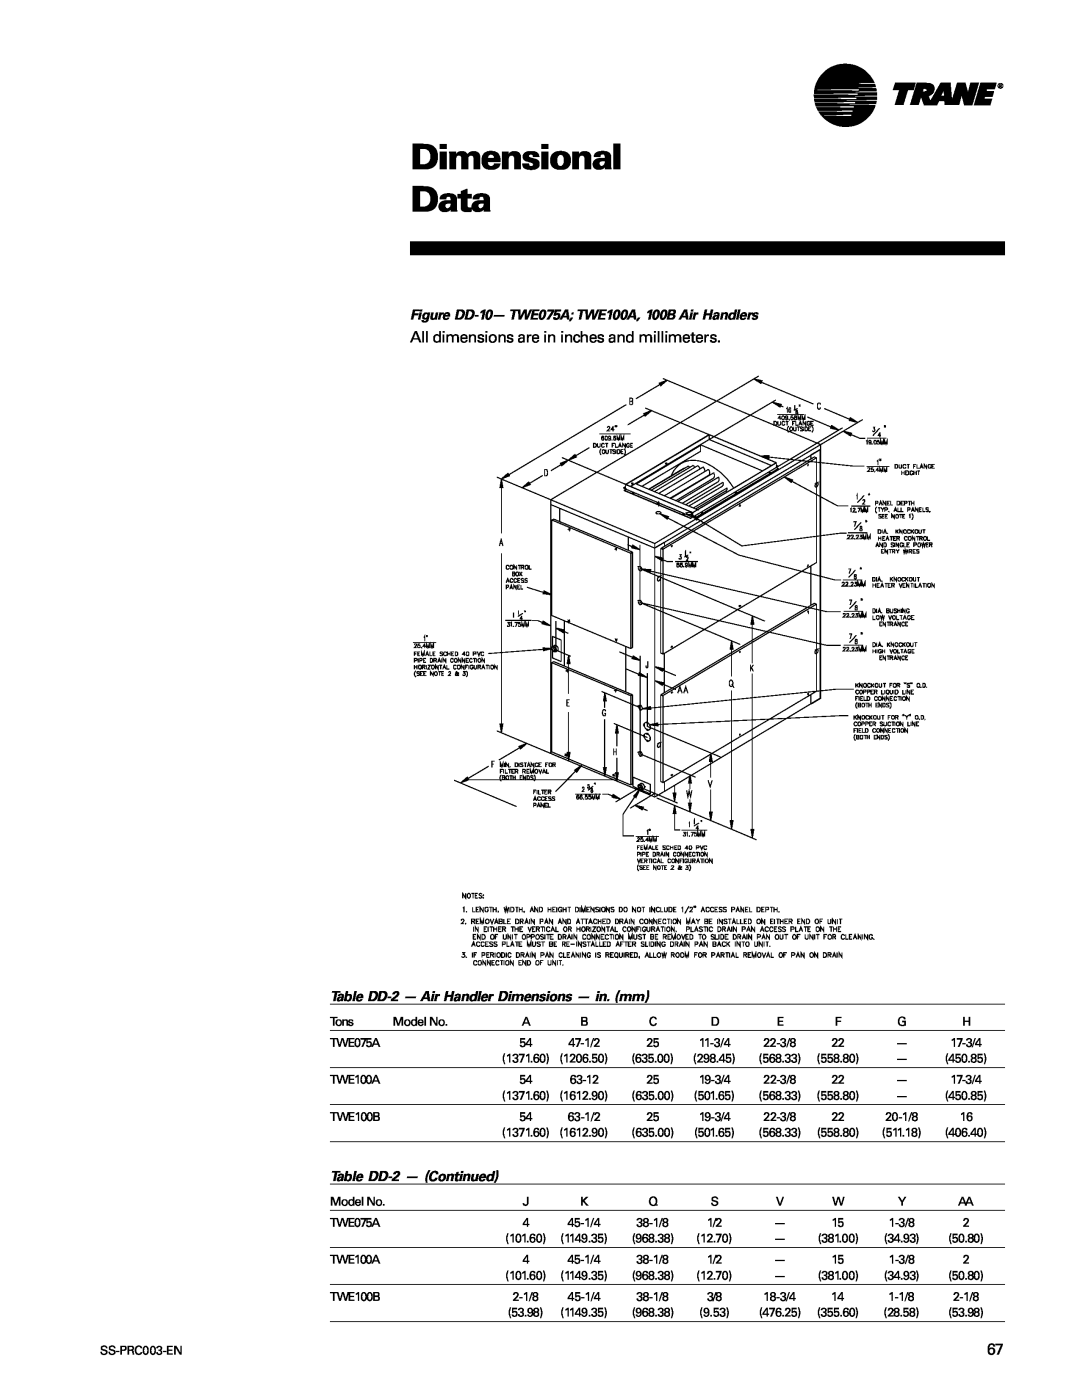 Trane SS-PRC003-EN manual Dimensional Data, All dimensions are in inches and millimeters, Table DD-2- Continued 